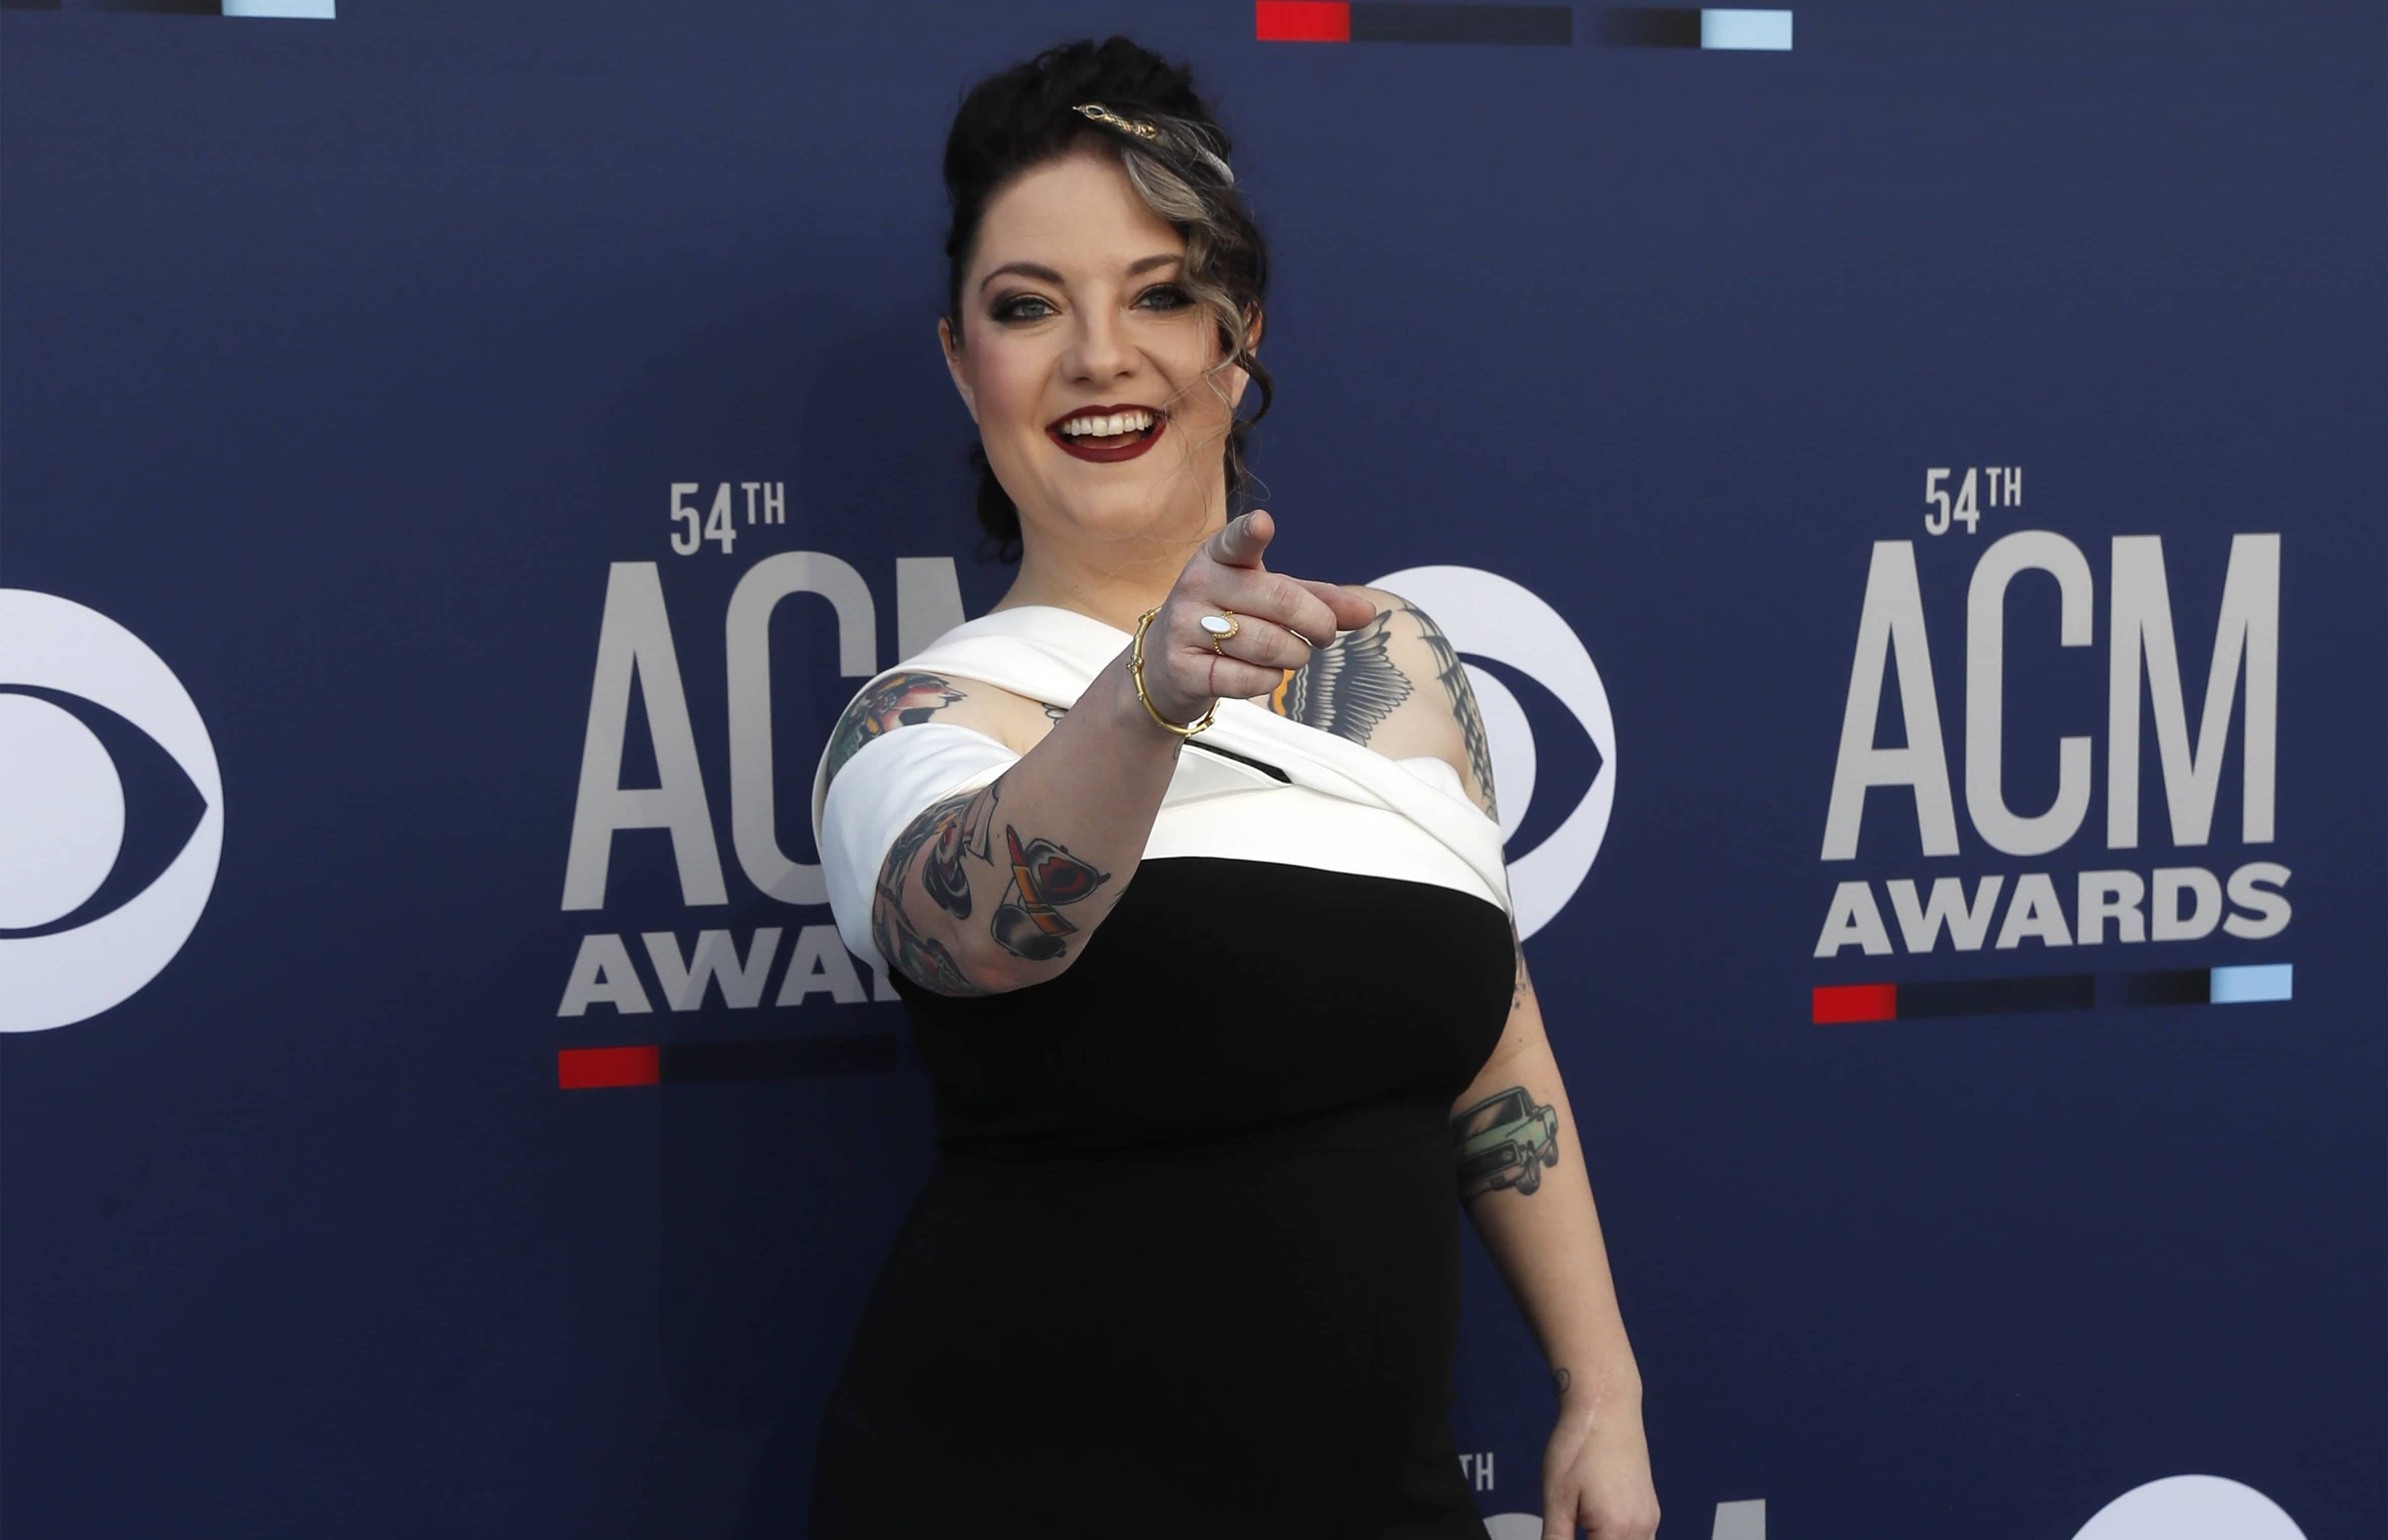 54th-academy-of-country-music-awards-arrivals-las-vegas-nevada-u-s-april-7-2019-ashley-mcbryde